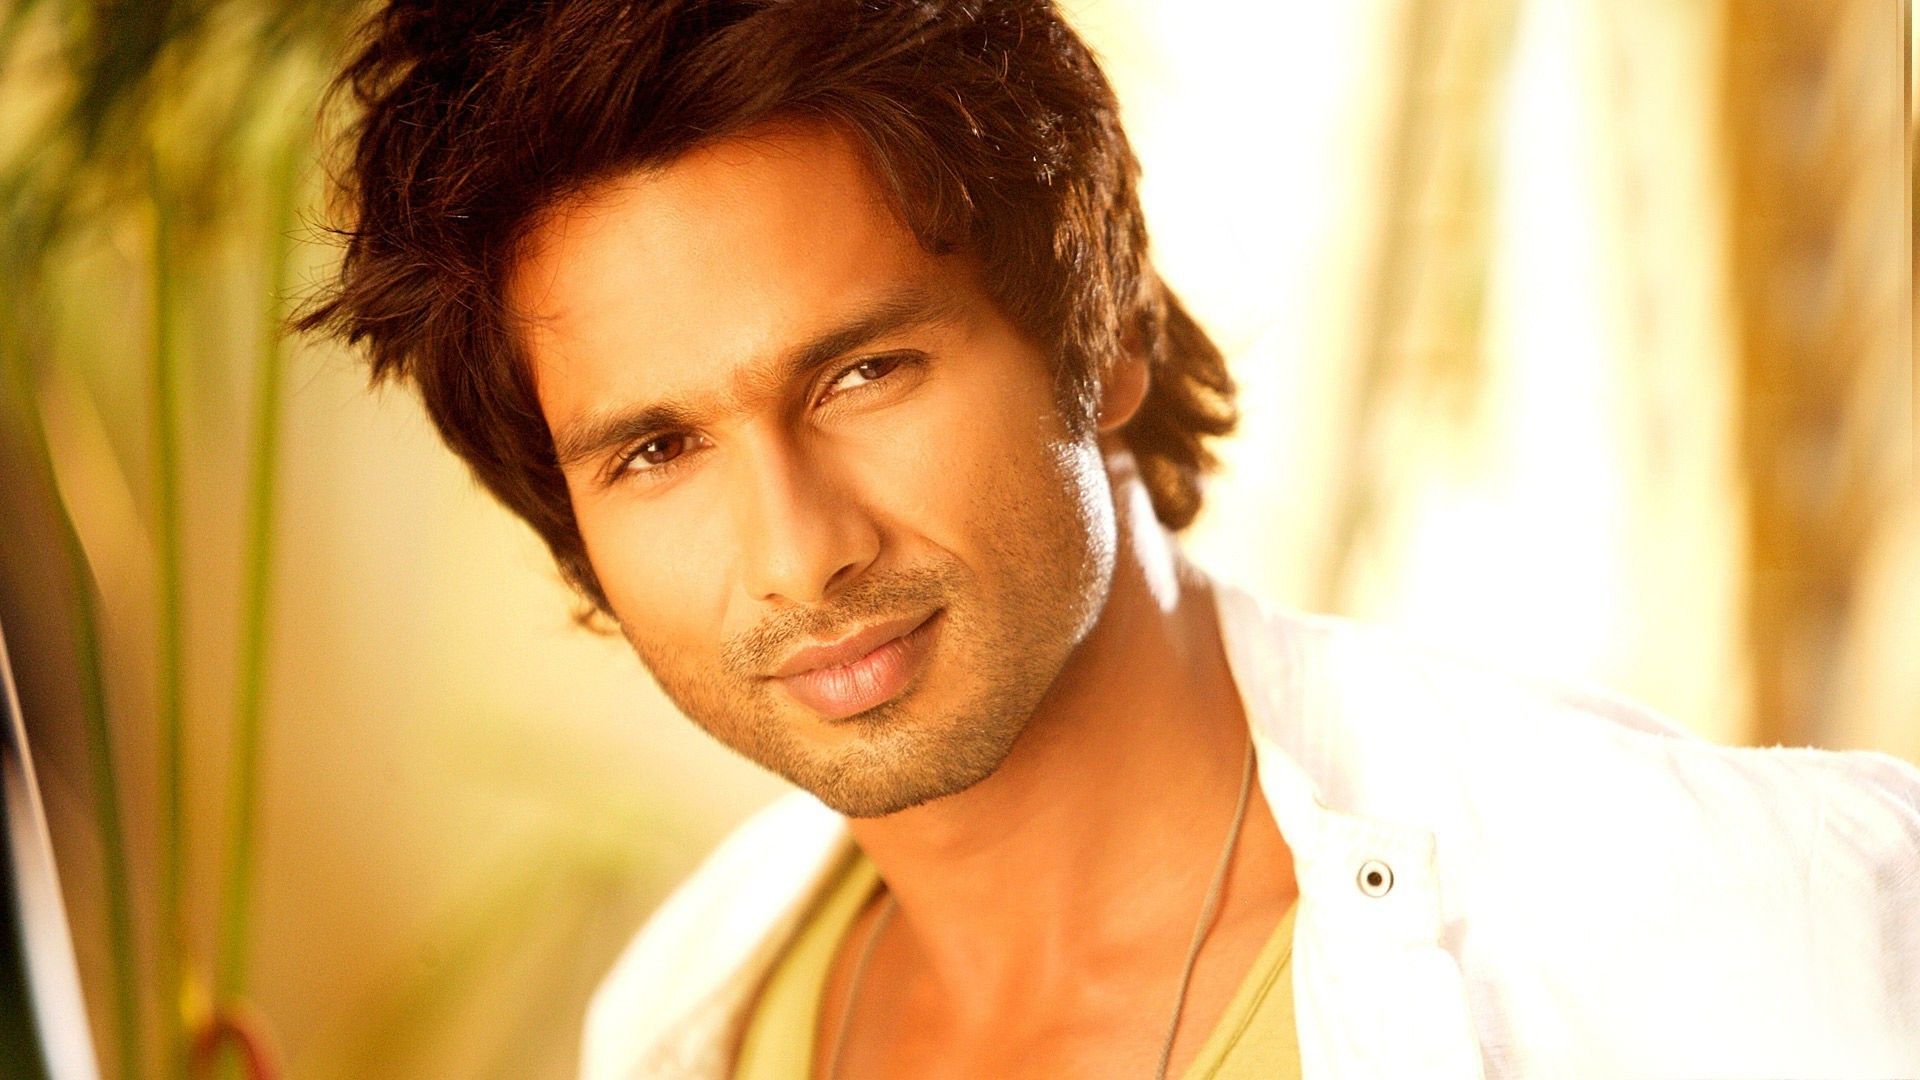 Shahid Kapoor Handsome boy pics Daily pics update HD